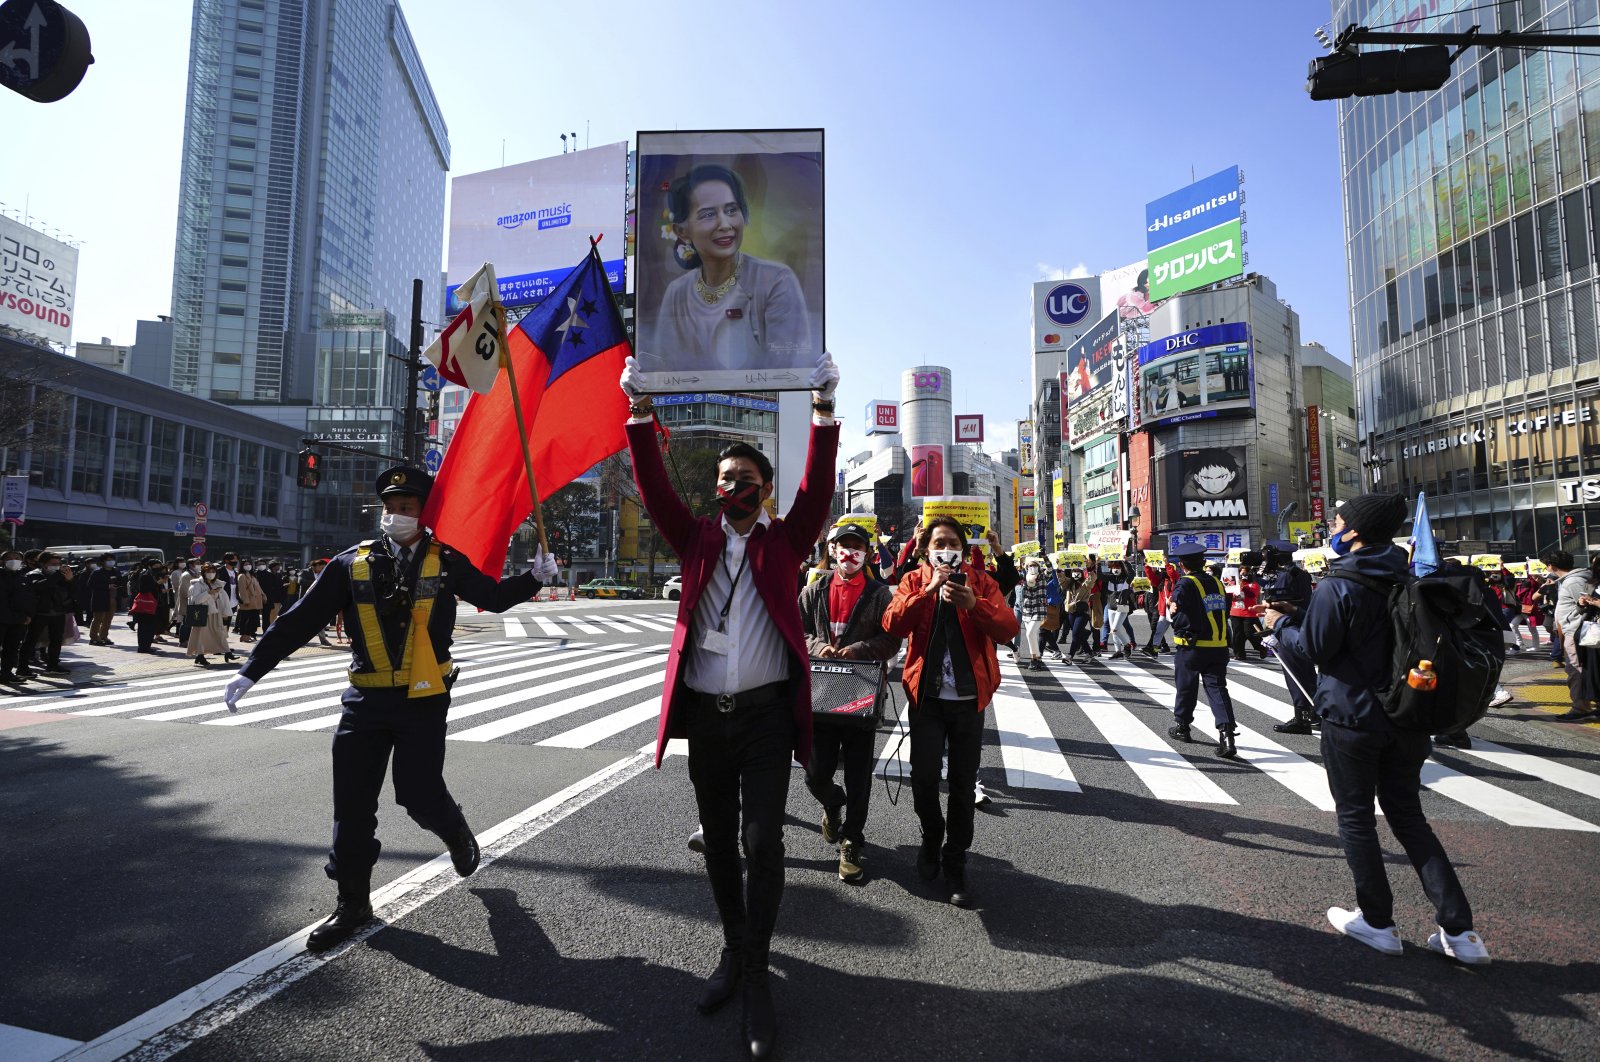 Myanmar people living in Japan and supporters march though Shibuya pedestrian crossings during a protest, Feb. 14, 2021, in Tokyo, Japan. (AP Photo)